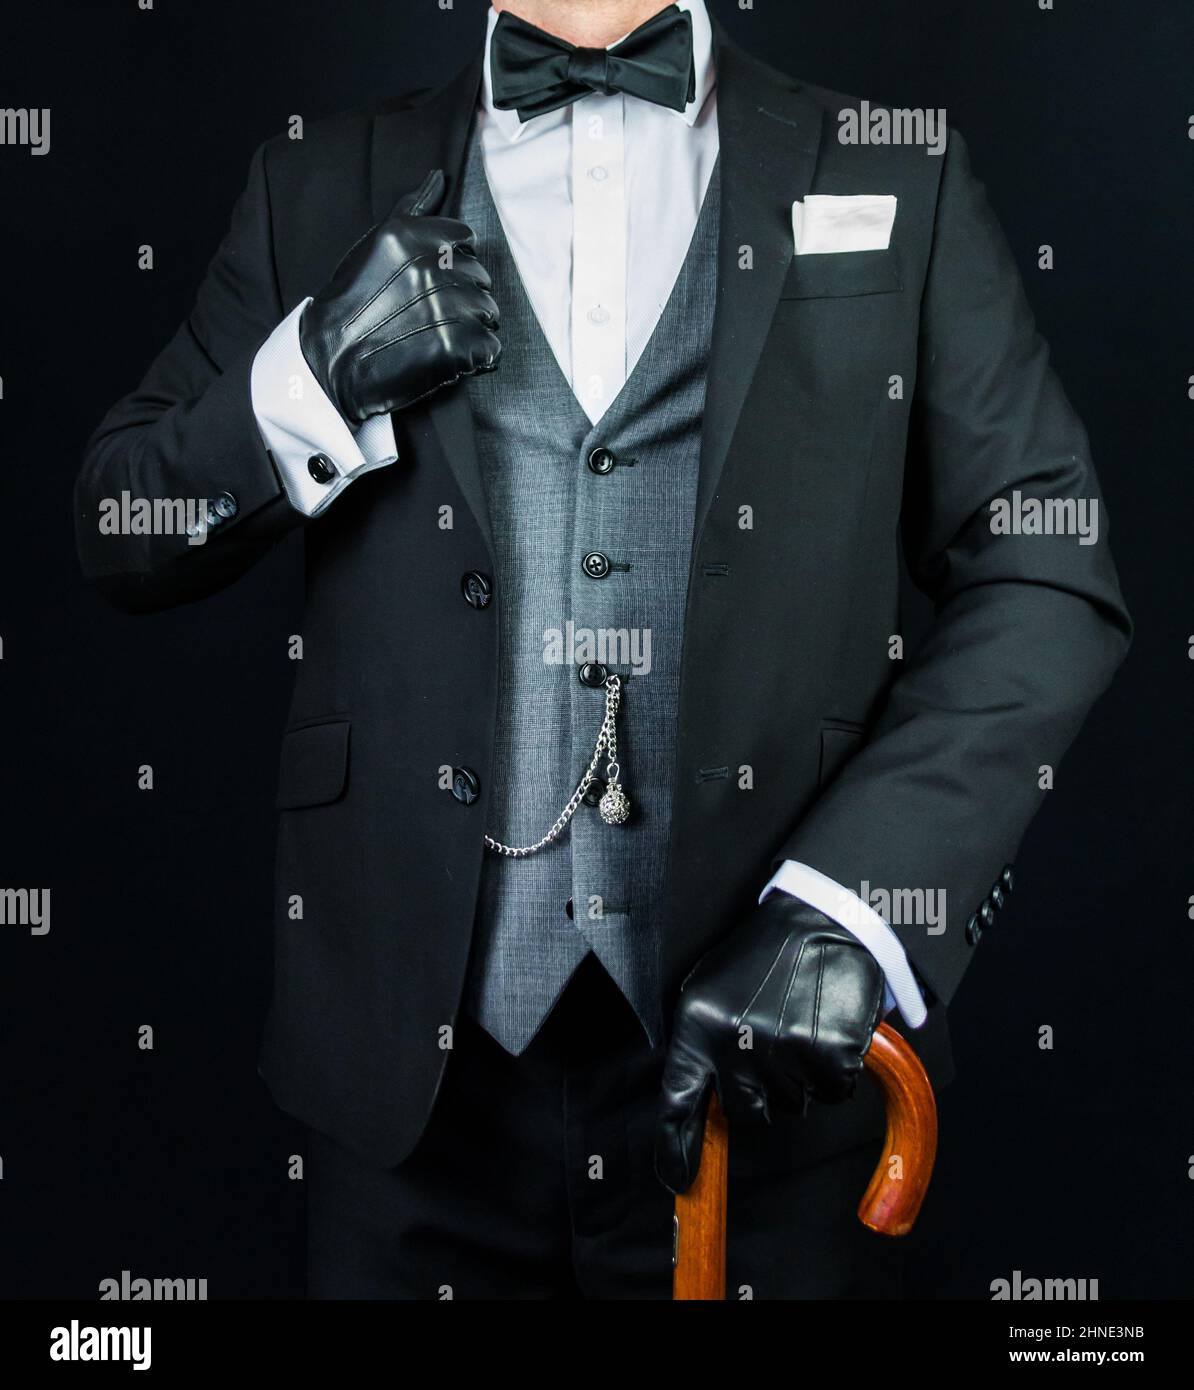 Elegant Gentleman in Dark Suit and Black Leather Gloves Holding Umbrella. Vintage Style and Retro Fashion. Stock Photo